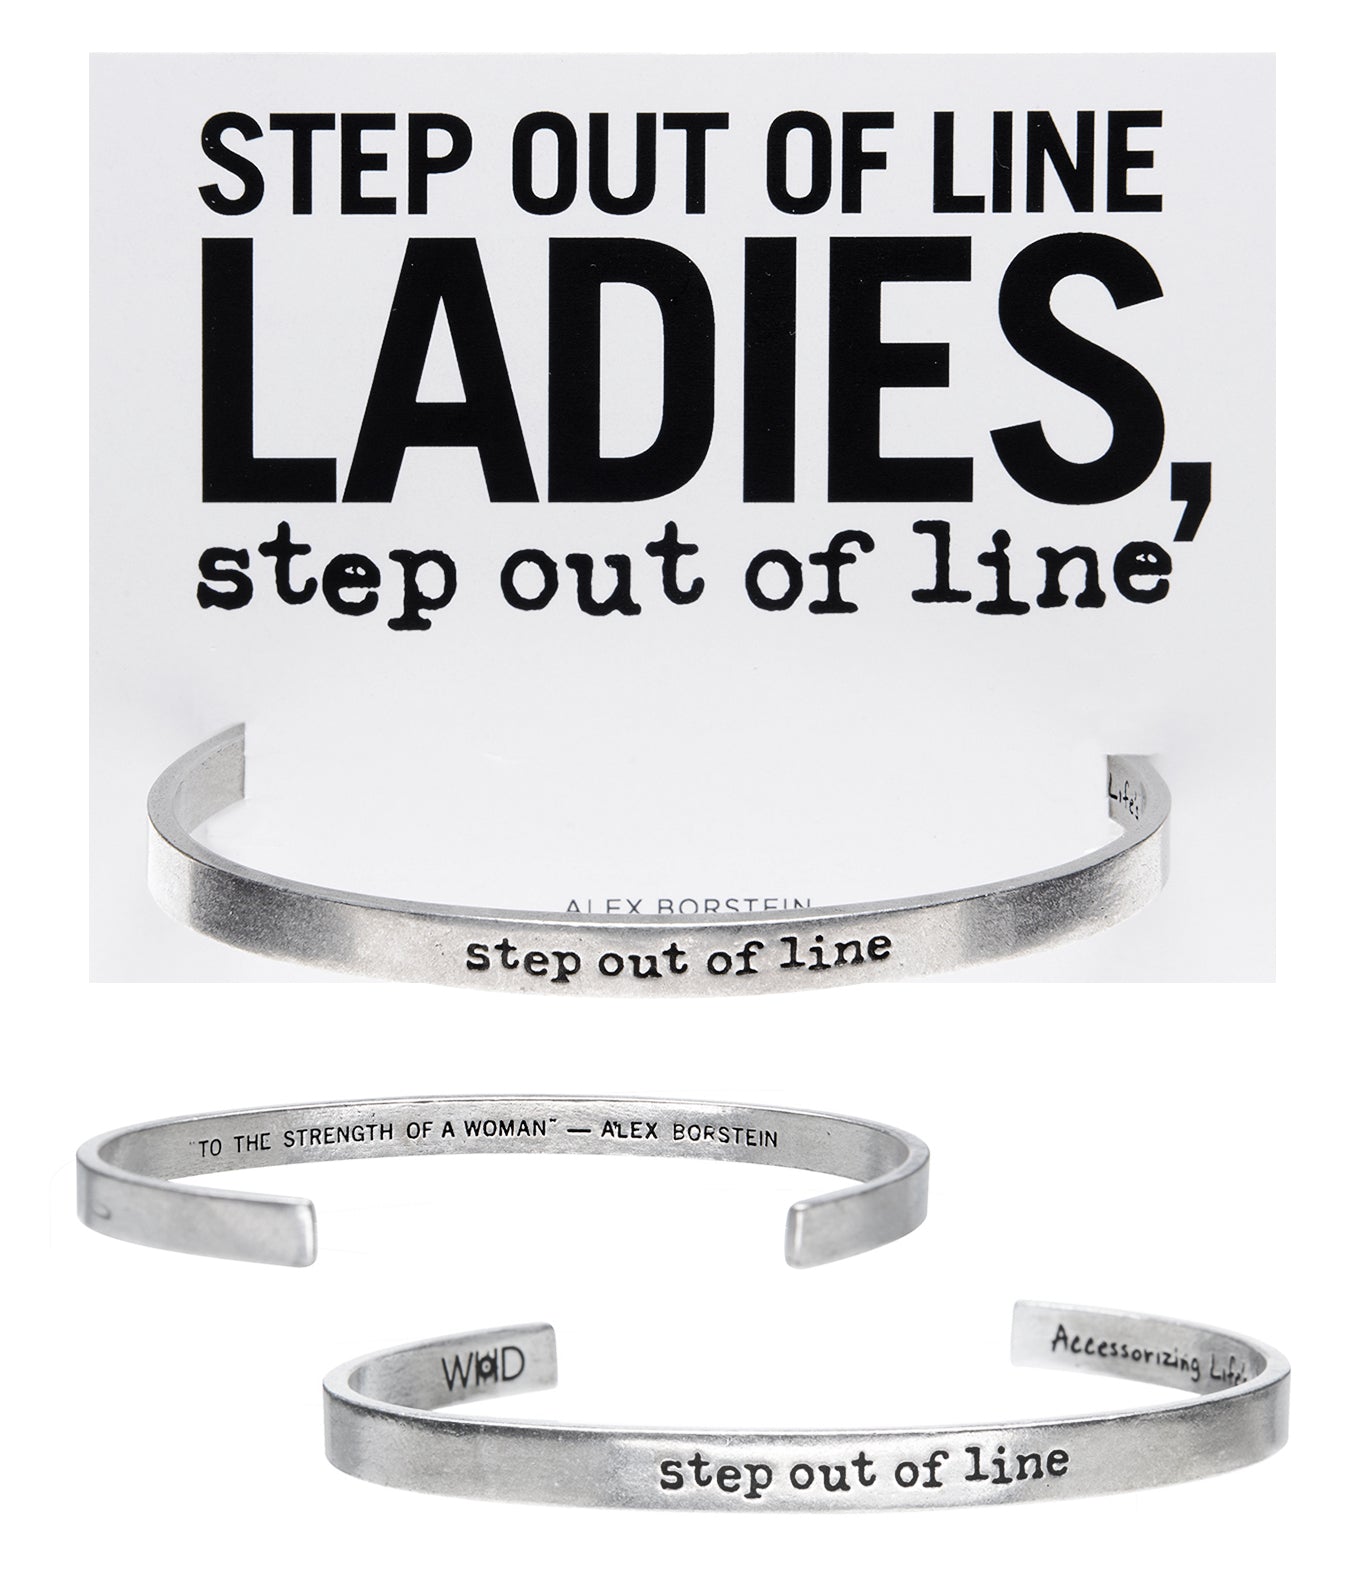 Step out of Line - Alex Borstein Quotable Cuff Bracelet with backer card